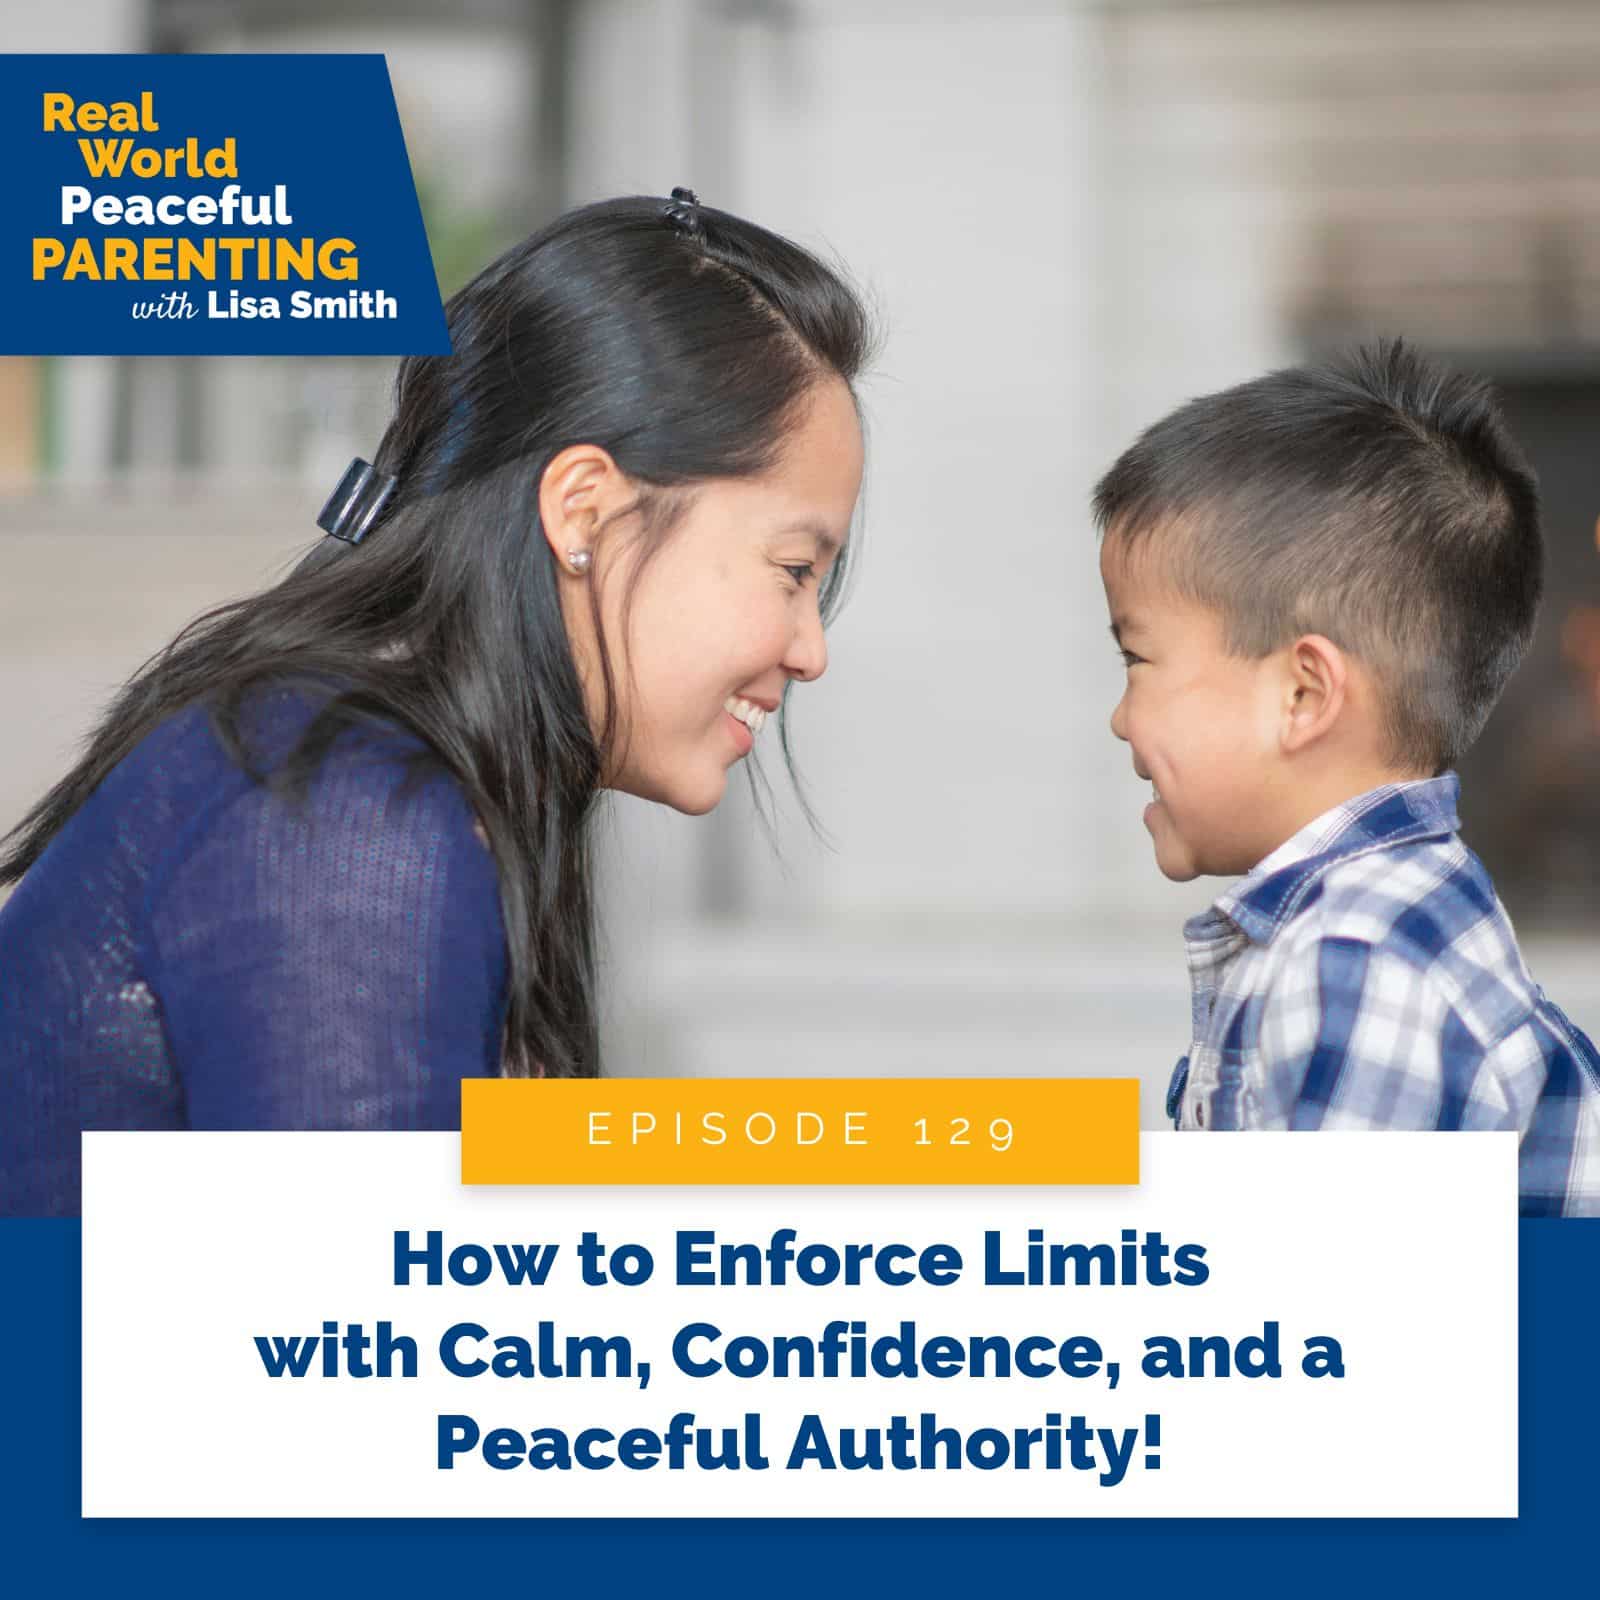 Real World Peaceful Parenting Lisa Smith | How to Enforce Limits with Calm, Confidence, and a Peaceful Authority!